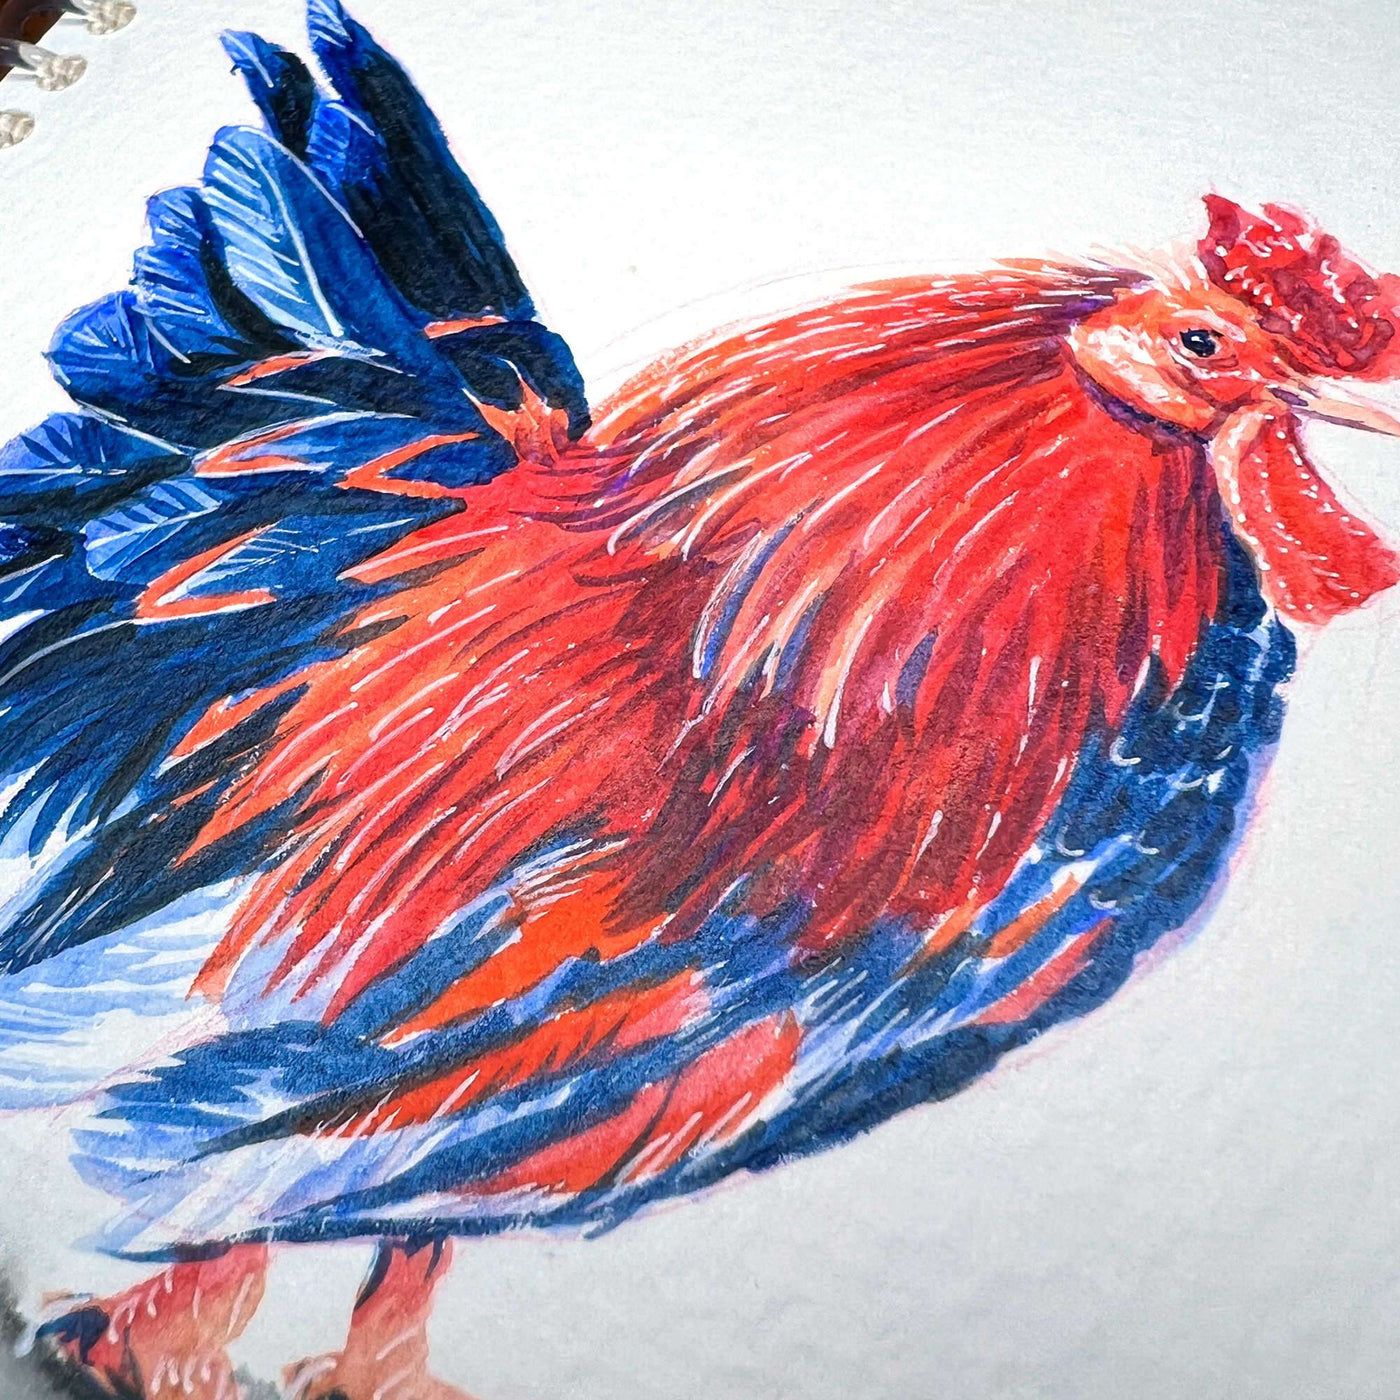 Owl/Rooster - Original Watercolor Painting of a vibrant red and blue rooster, showcasing detailed brush strokes on textured paper.